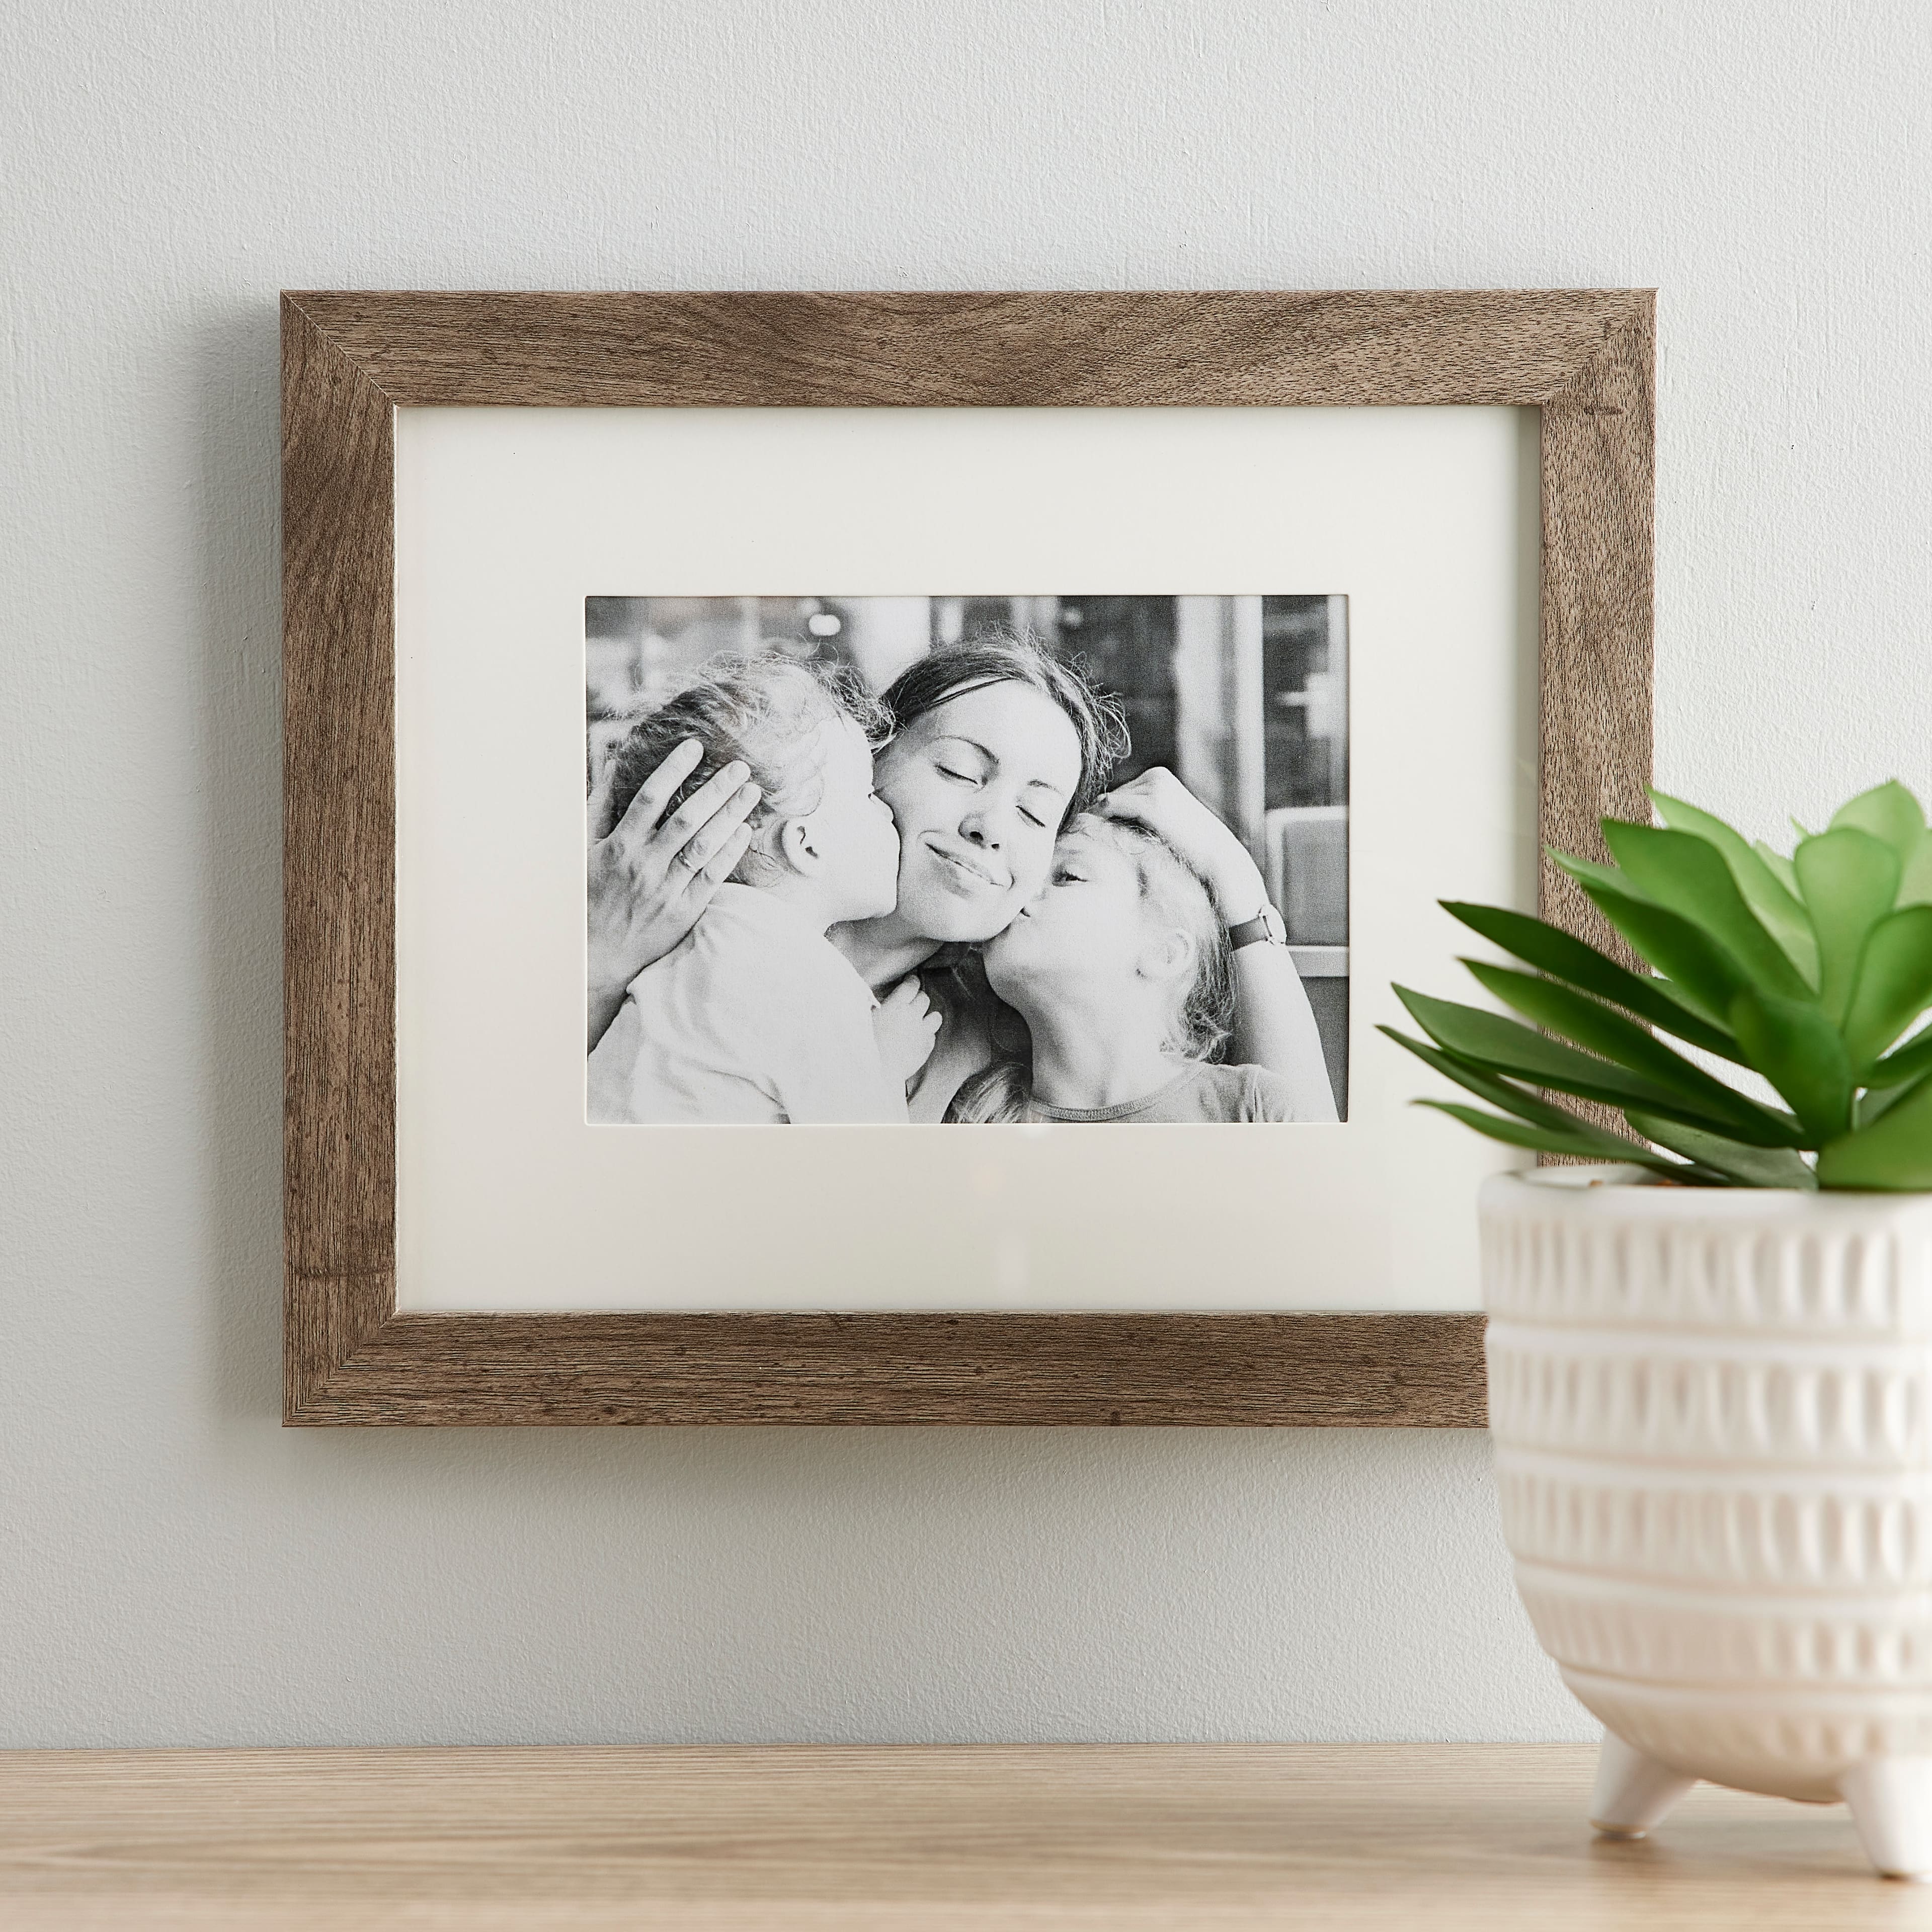 Gray Belmont Frame with Mat by Studio D&#xE9;cor&#xAE;